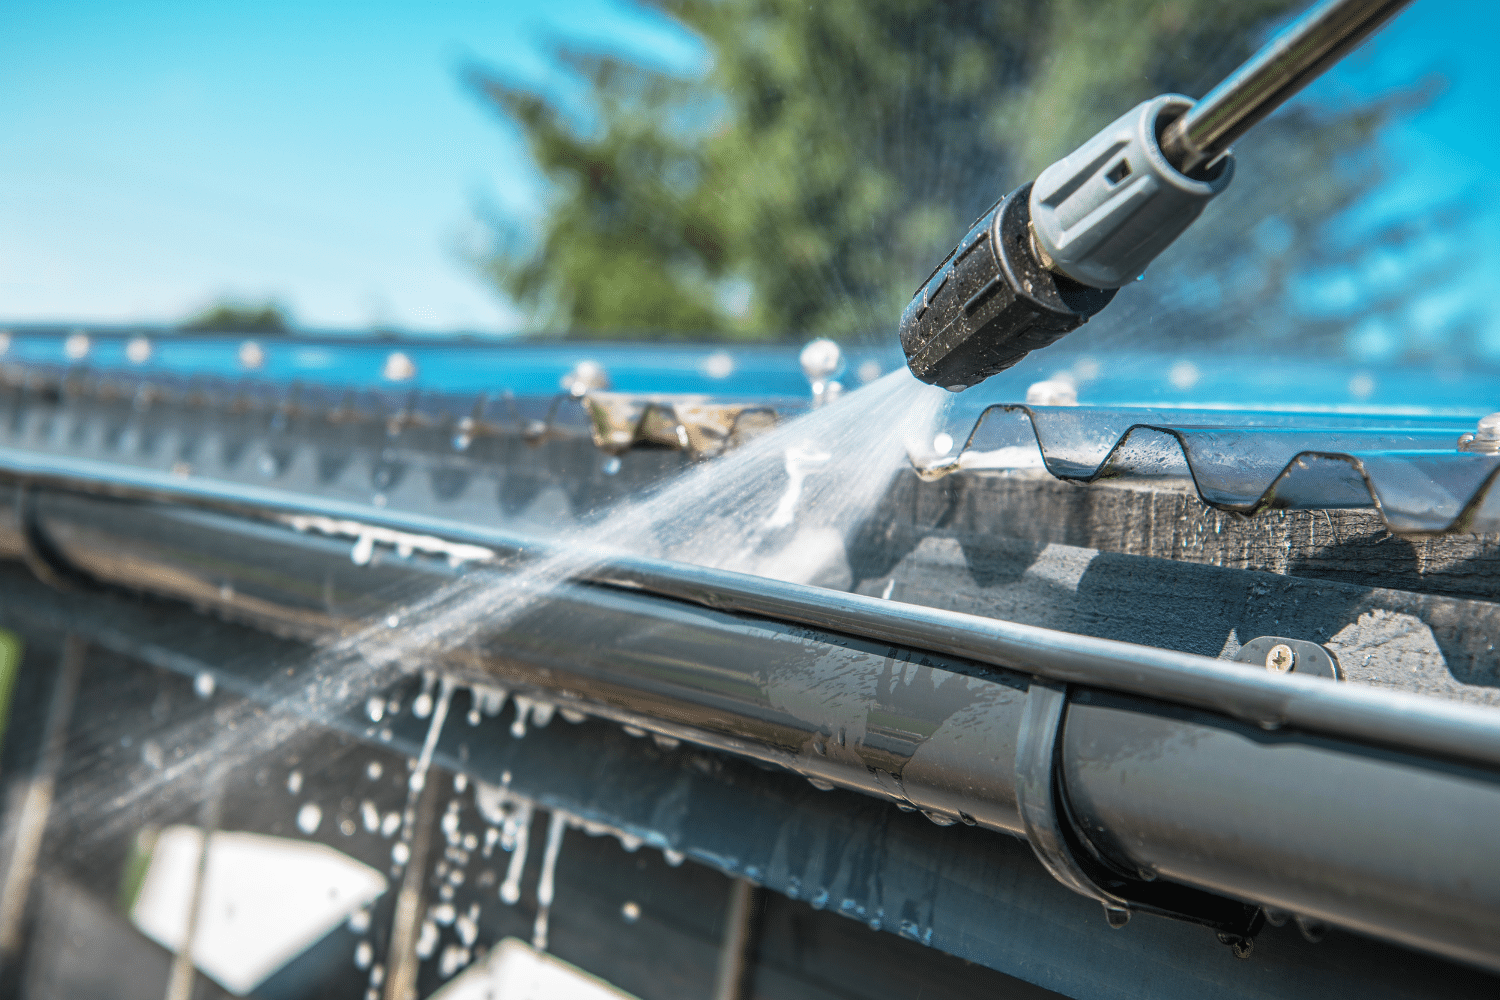 Cleaning gutters with a garden hose to prevent clogs